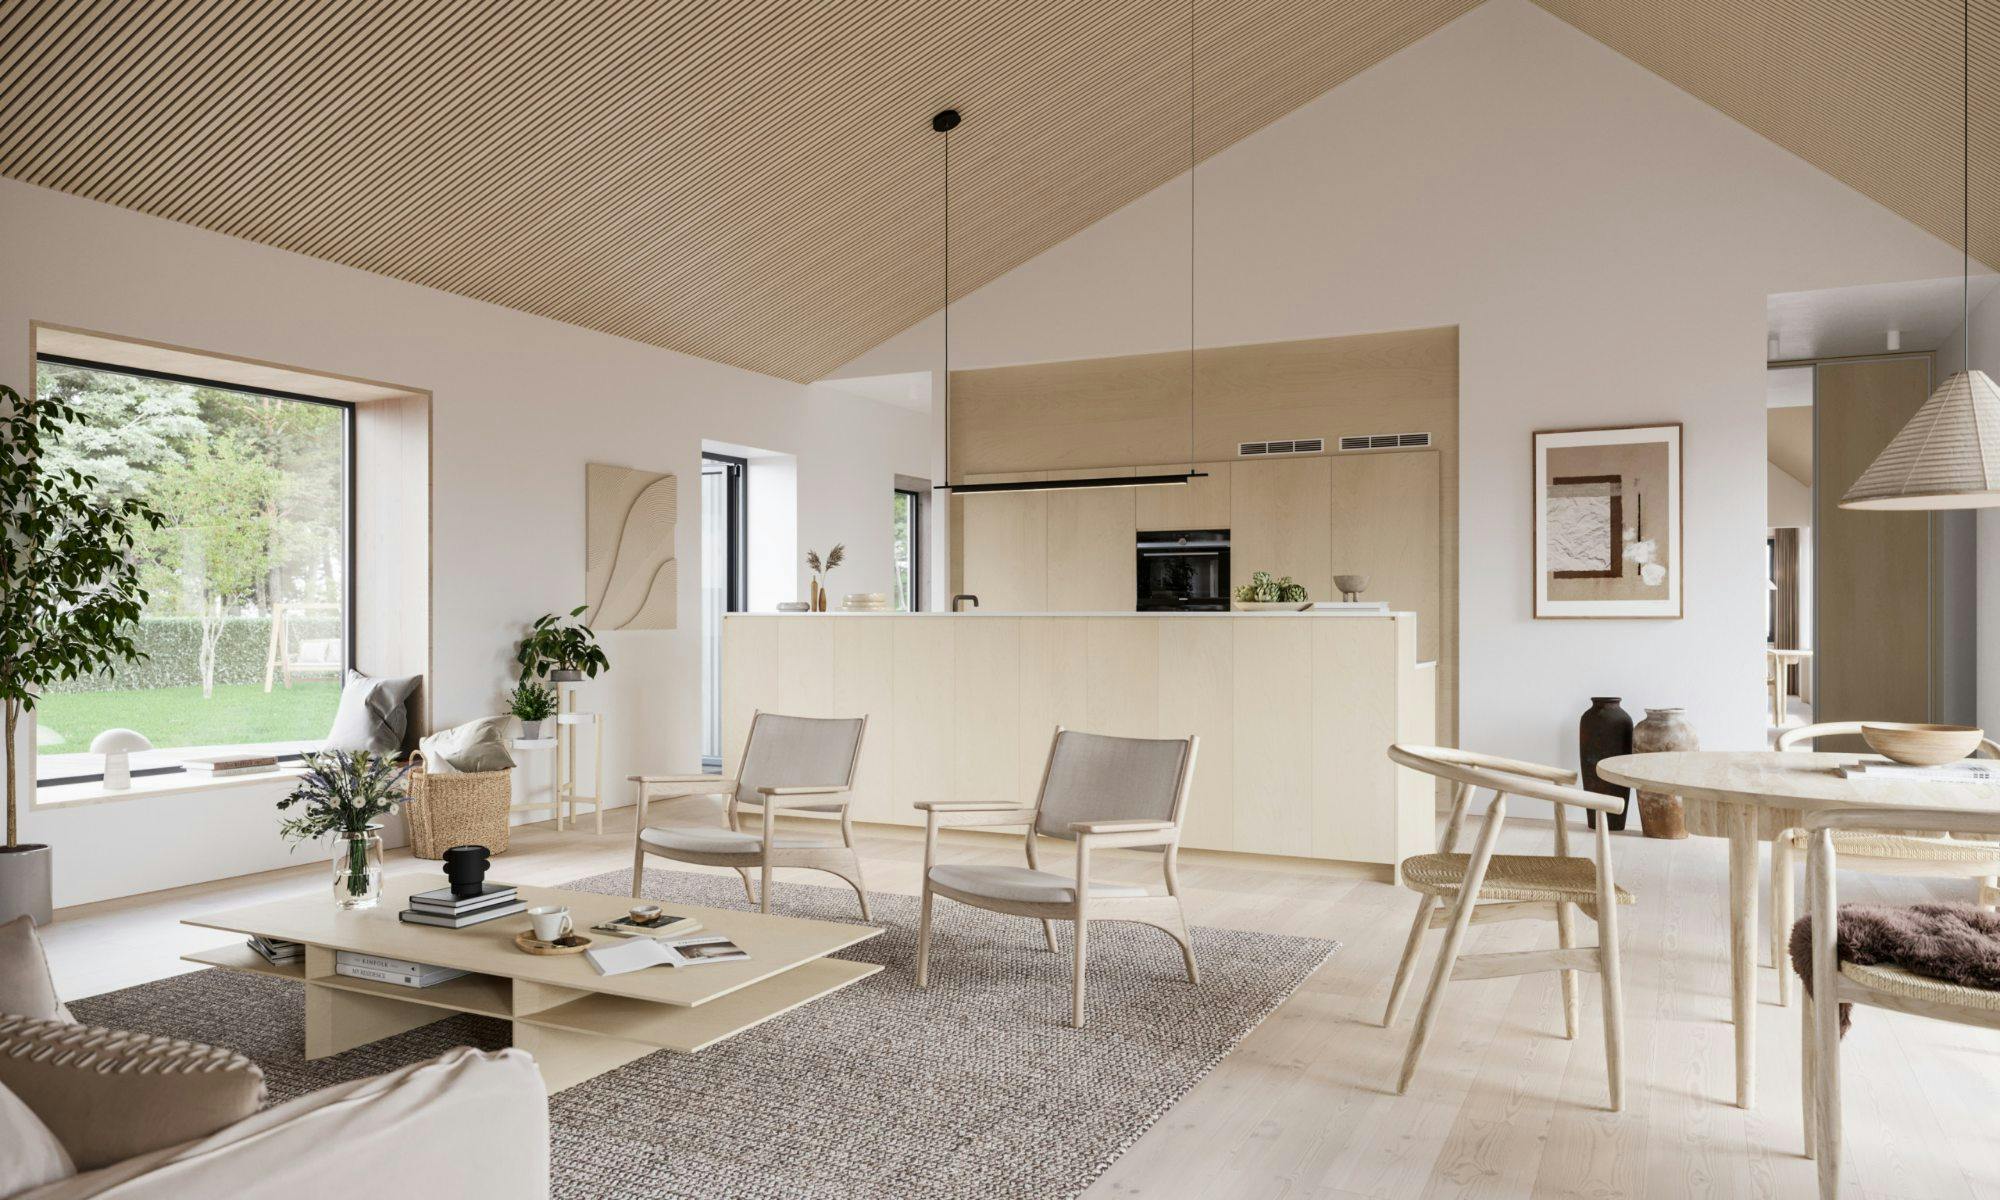 Numéro d'image 33 de la section actuelle de DKTN Bergen engages in dialogue with wood in this minimalist and timeless kitchen de Cosentino France